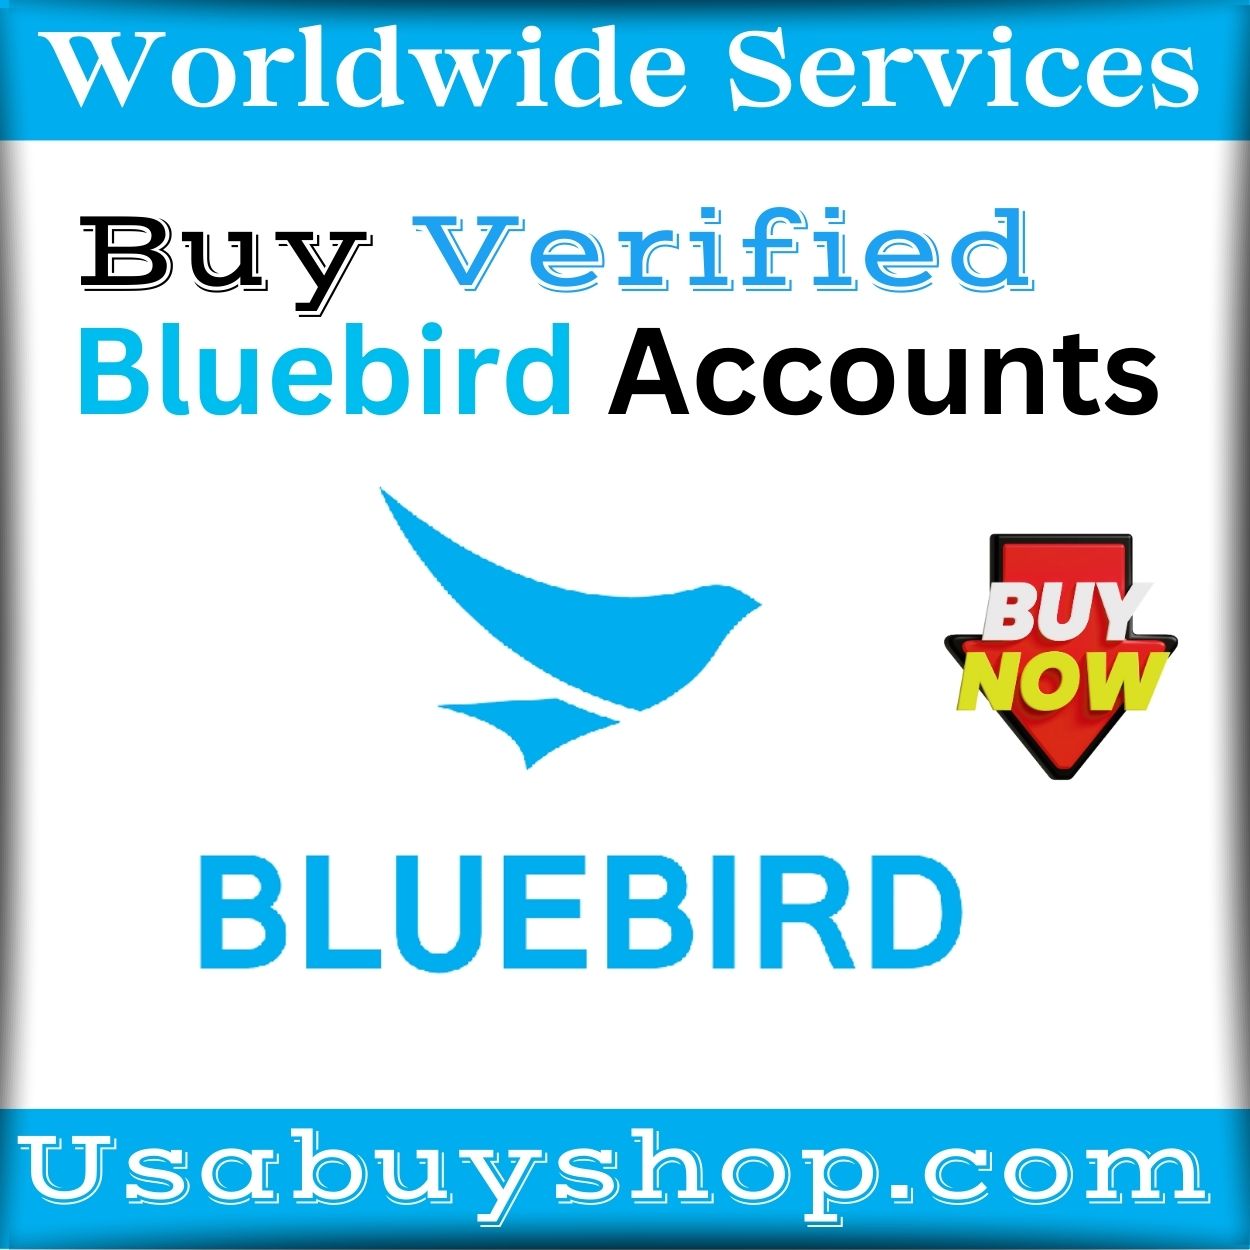 Buy Verified Bluebird Accounts - 100% Verified and Reliable